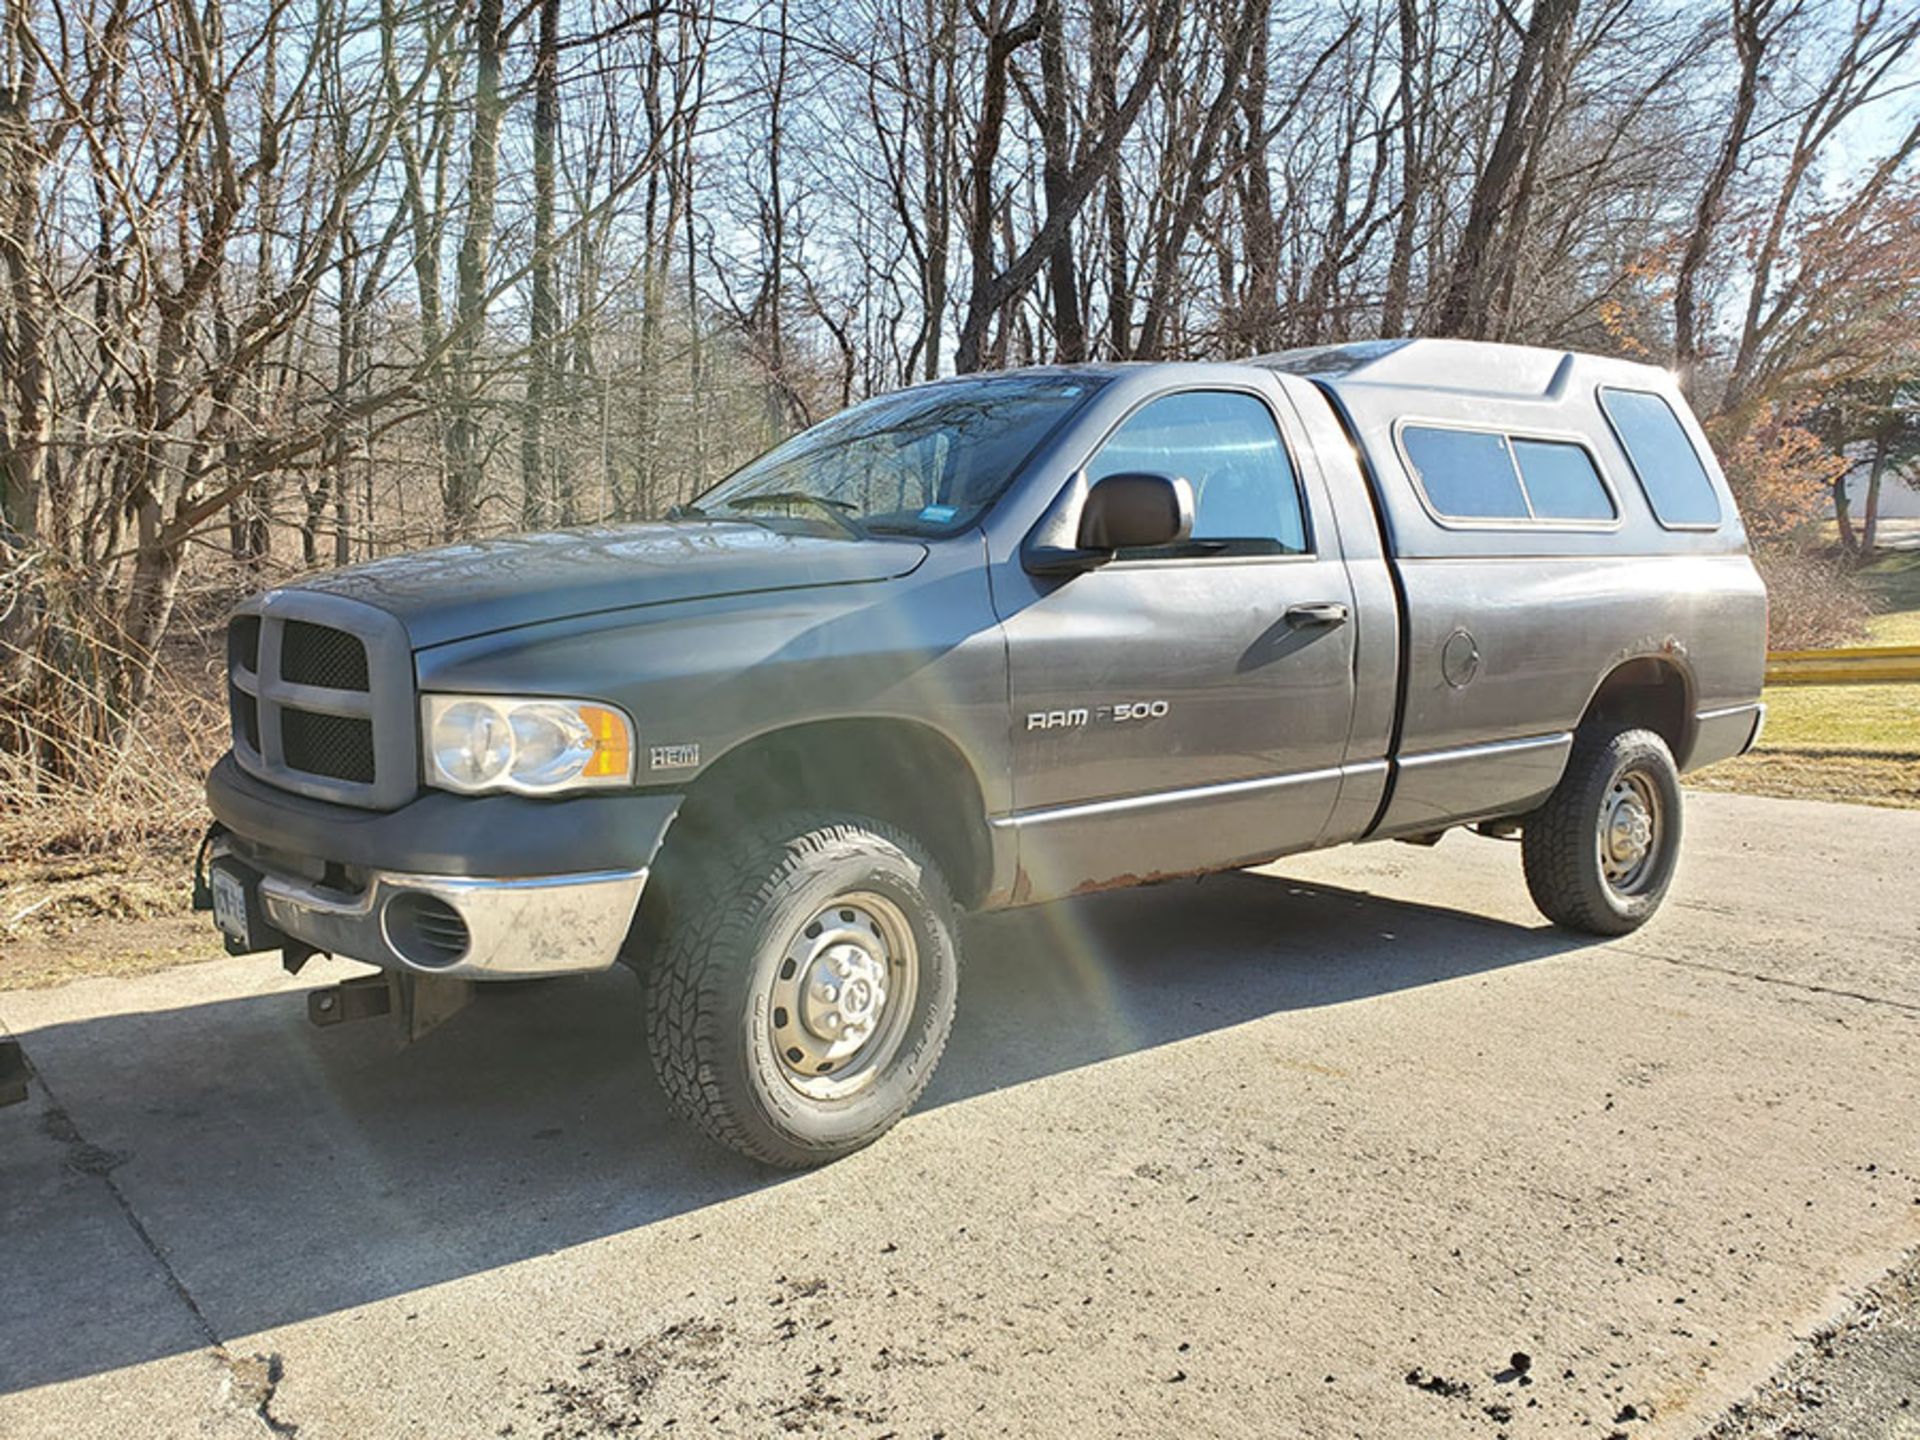 2004 DODGE 2500 4X4 PICKUP TRUCK; WITH 5.7 LITER HEMI MAGNUM, CAMPER SHELL, MINUTE MOUNT (2) - Image 4 of 23